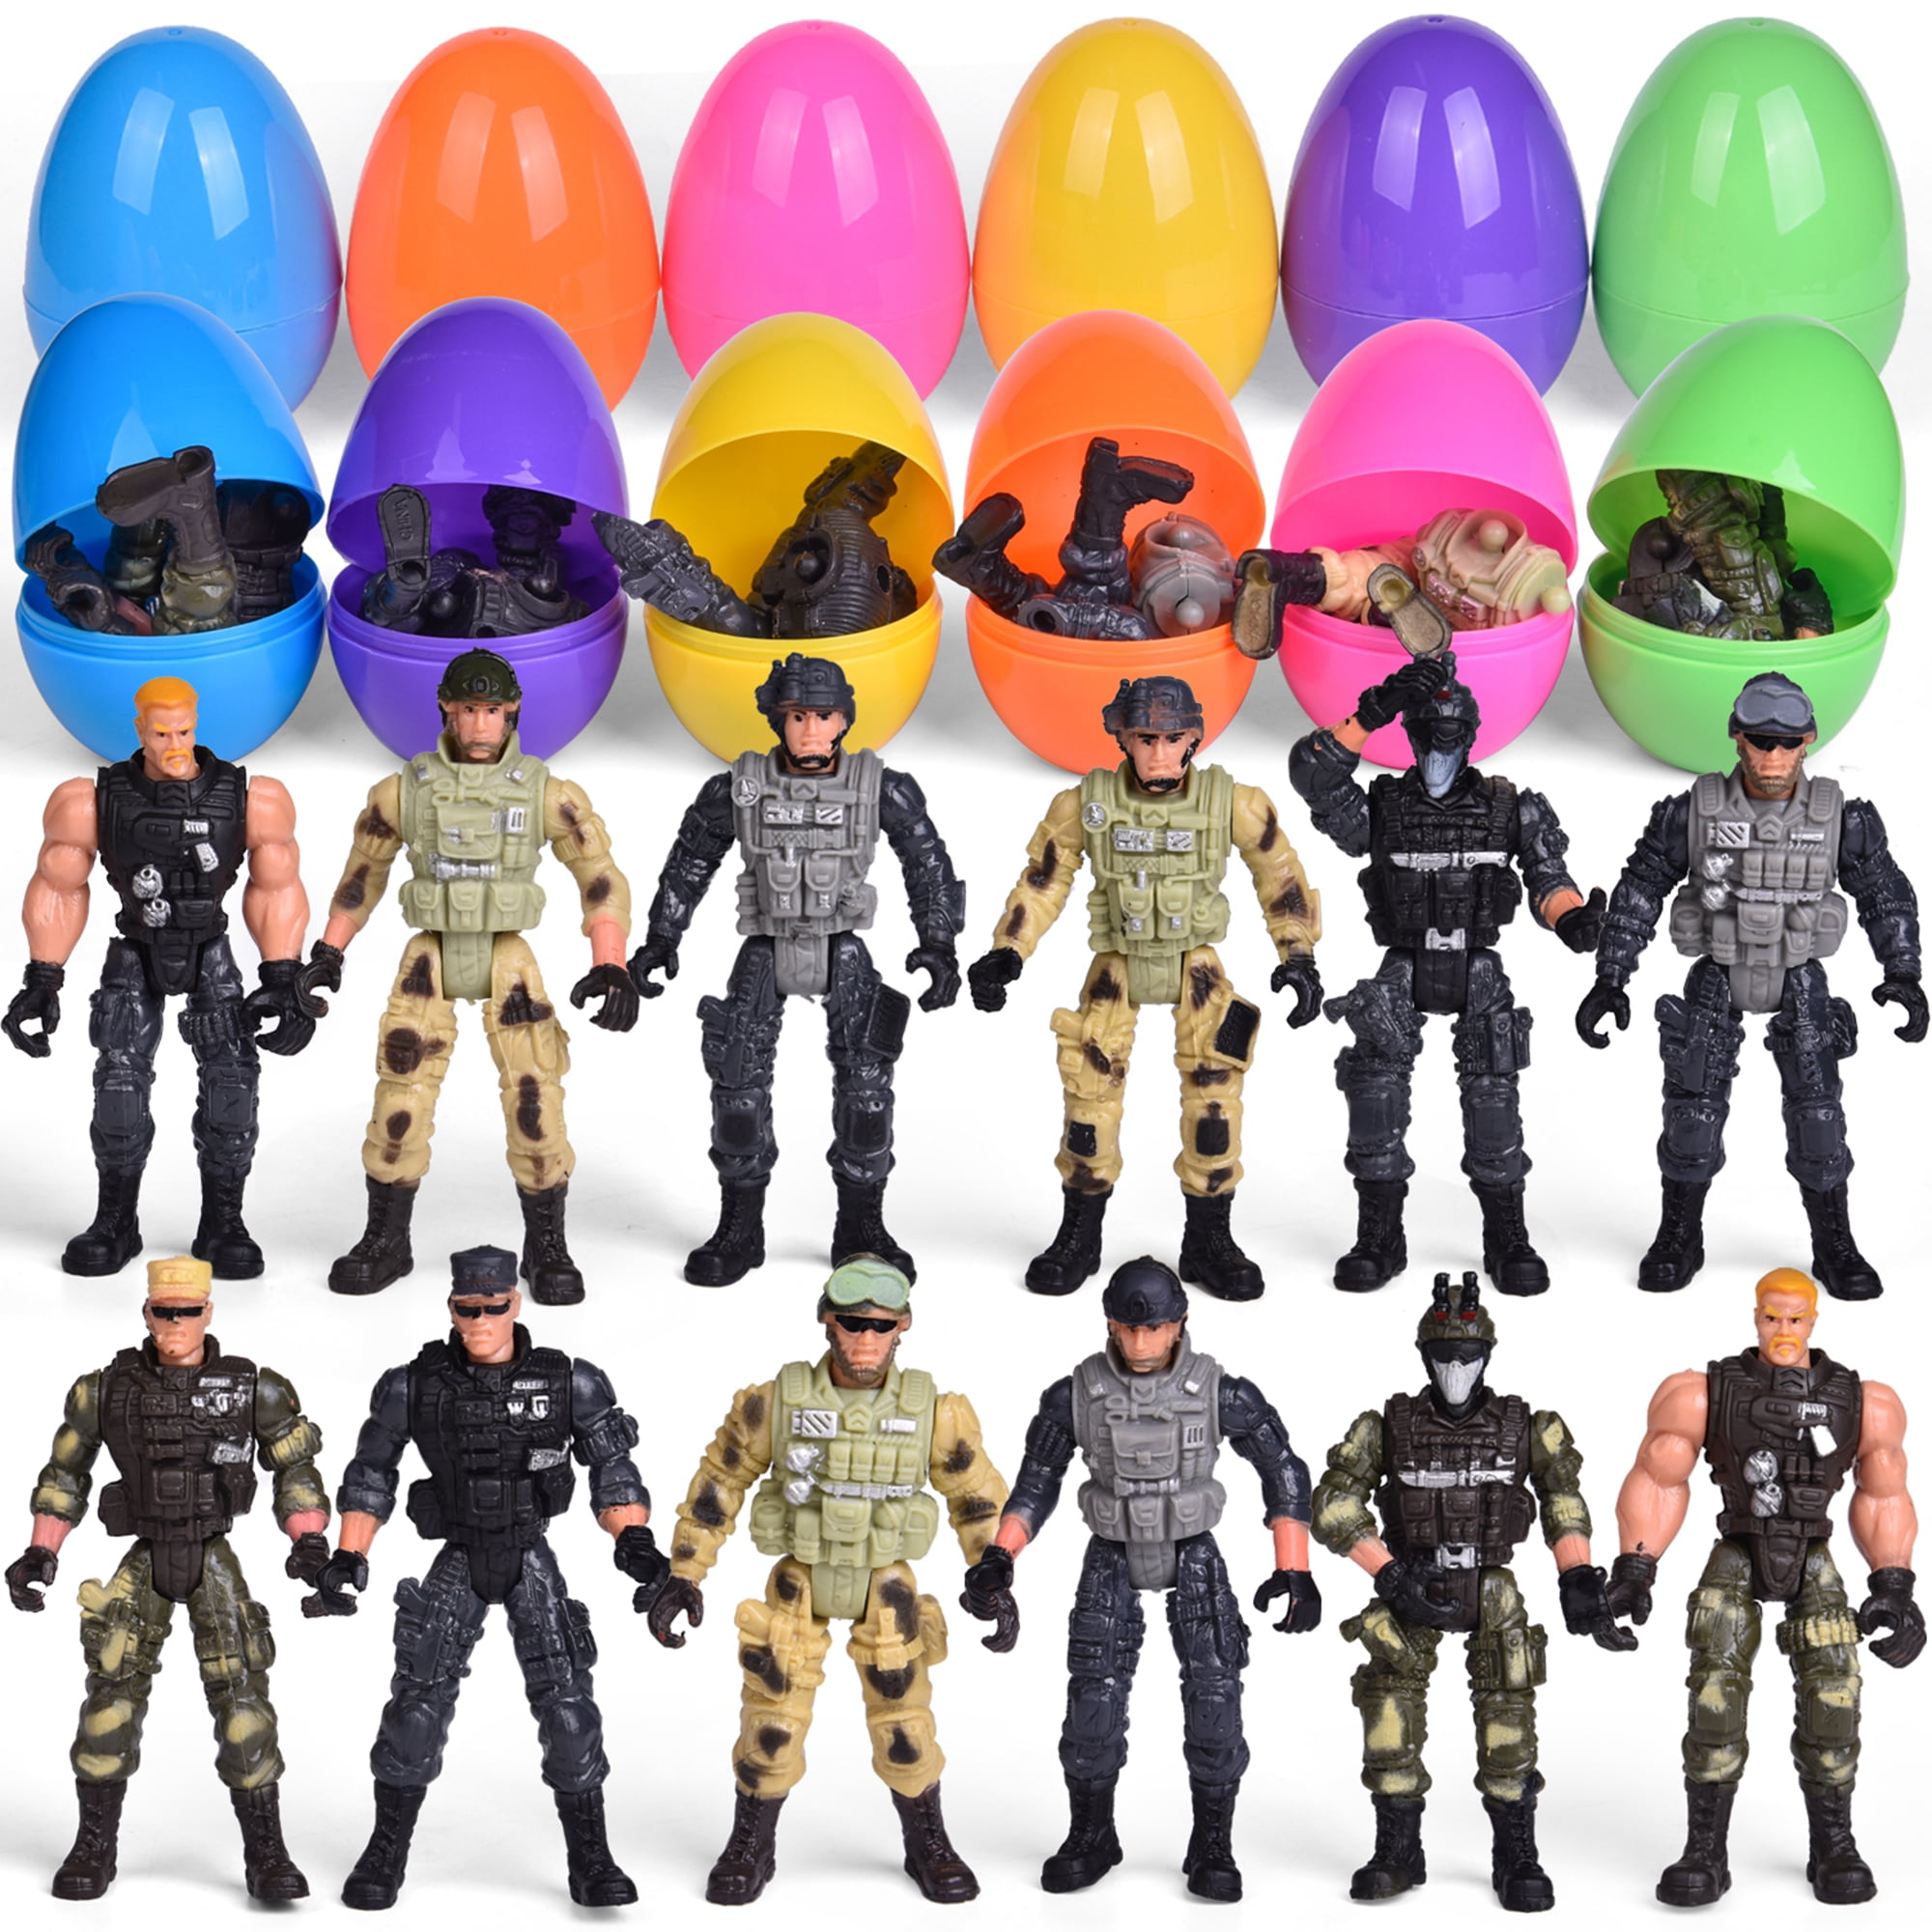 18pcs/set Military Navy Air Land Force Soldiers Army Building Blocks Figures Toy 